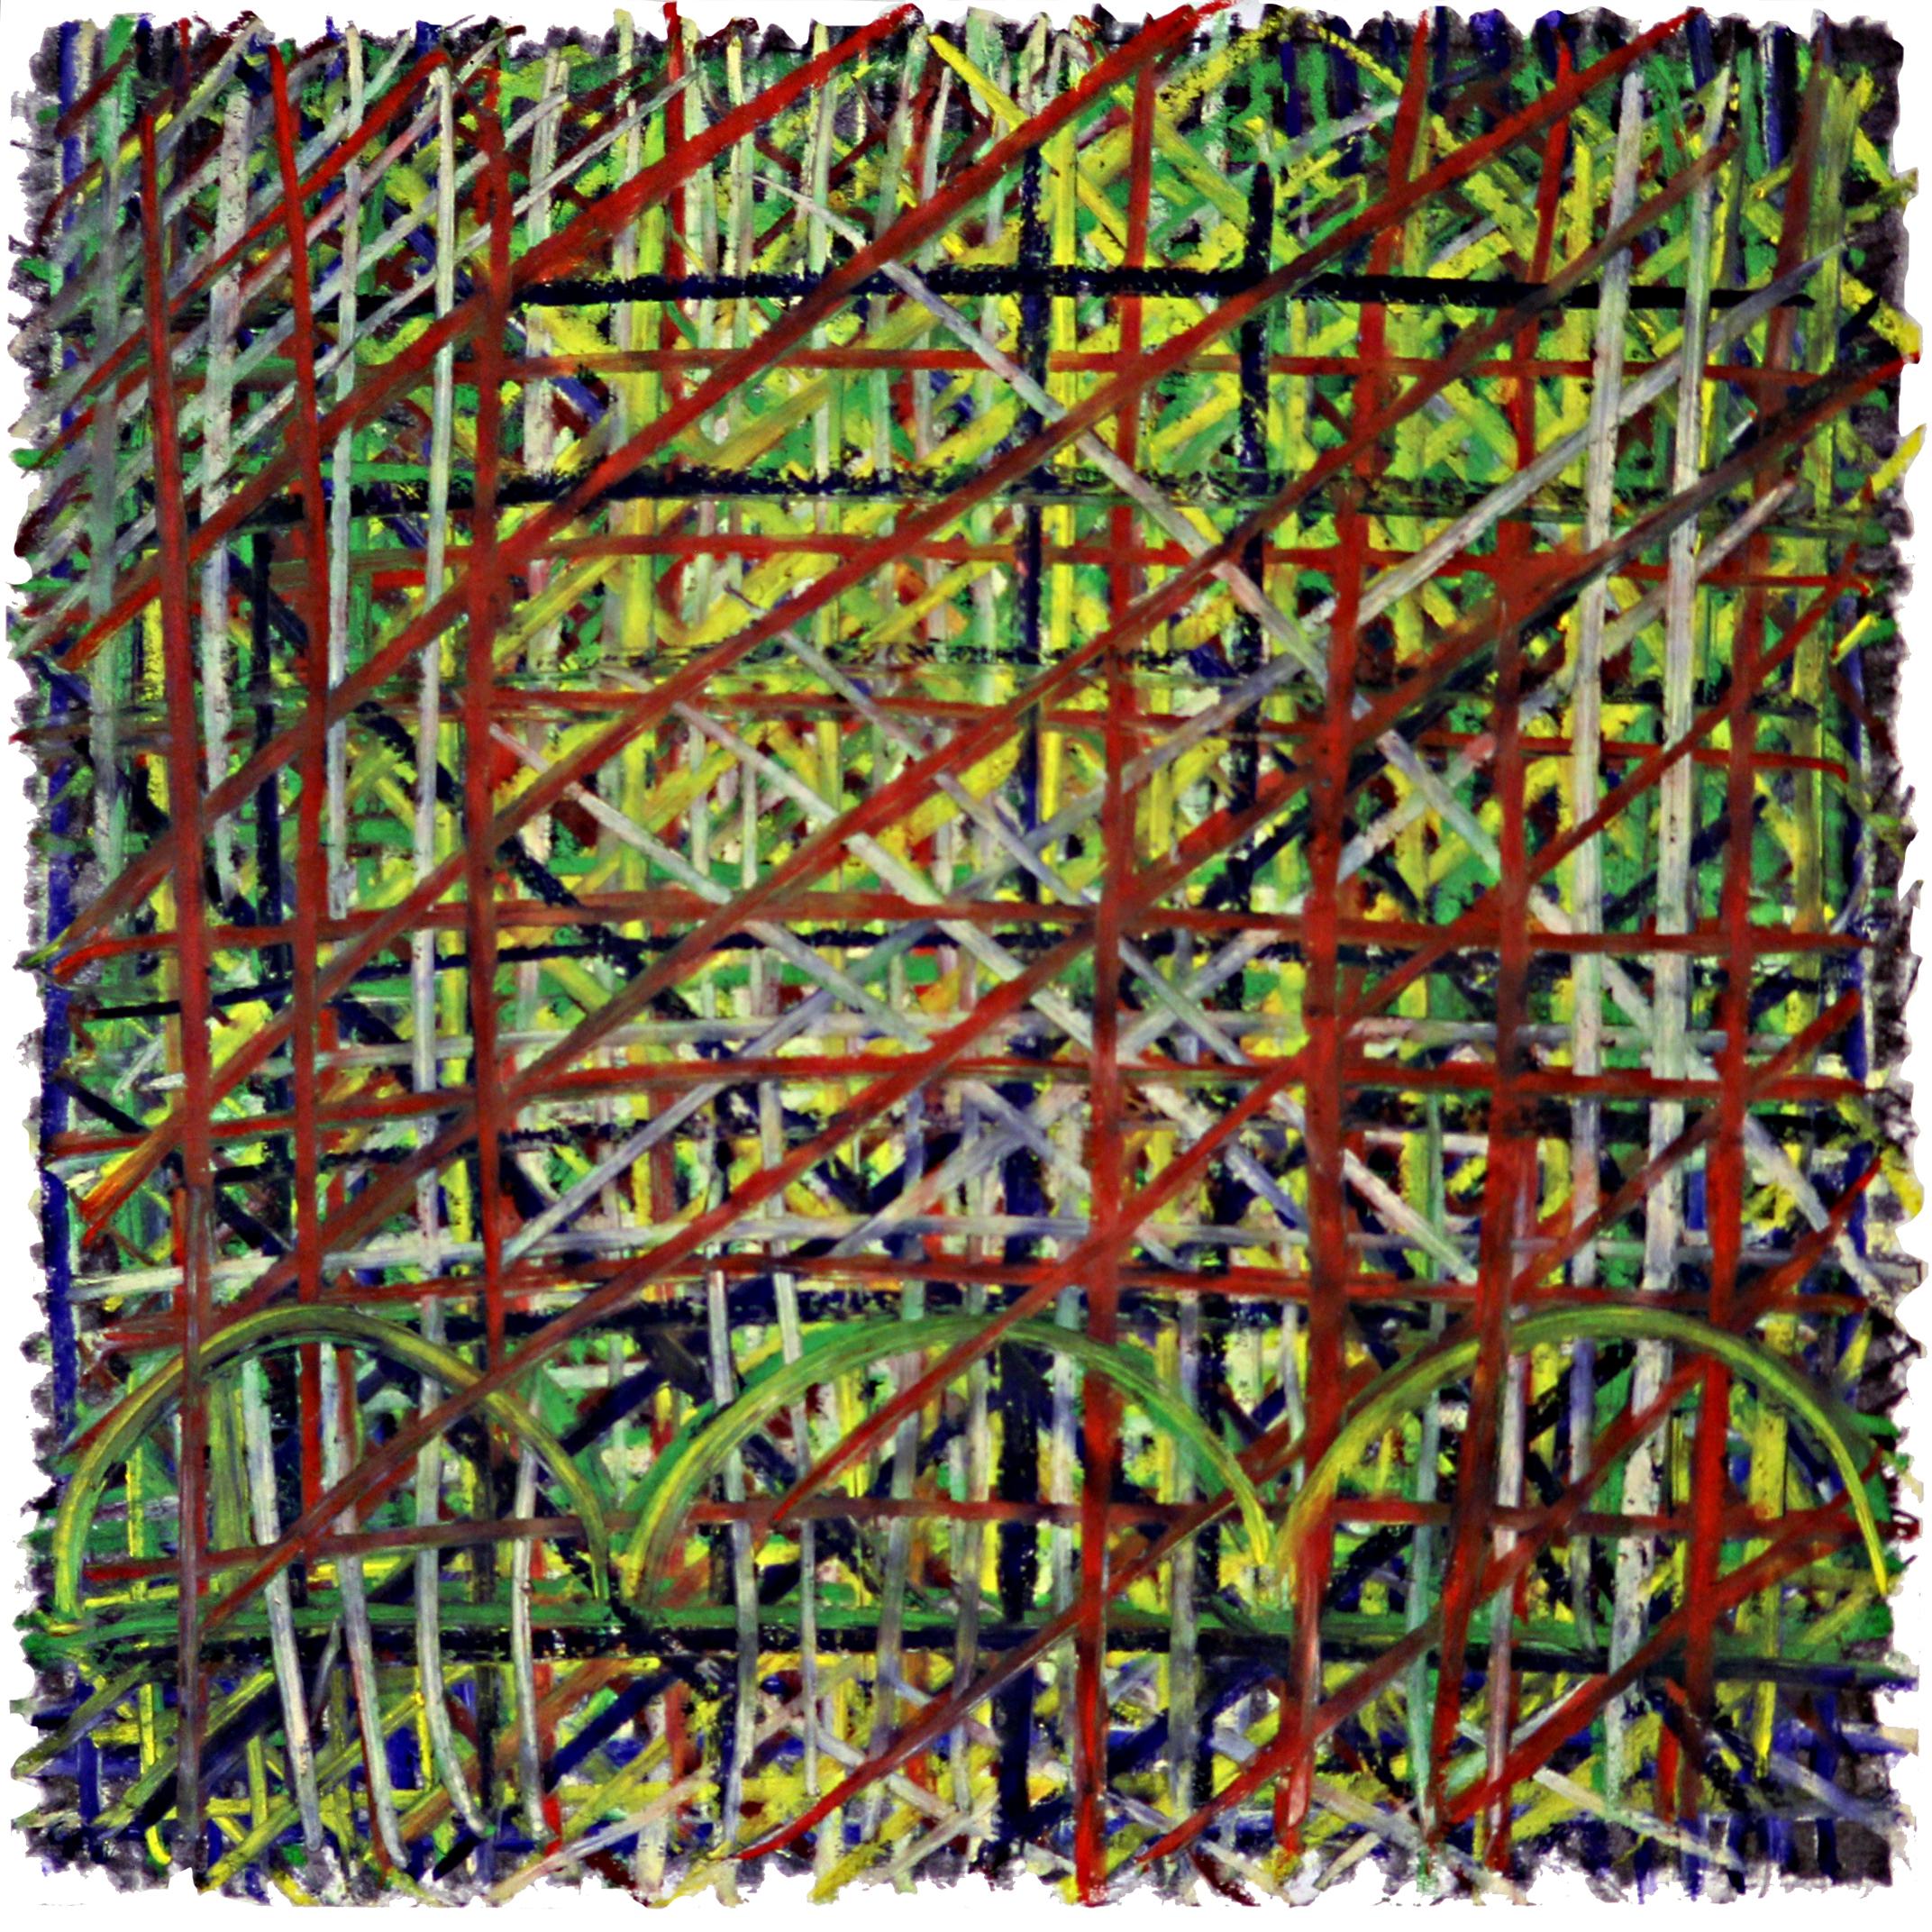 Roller Coaster – No.1 - Expressionist Painting by Tony Khawam